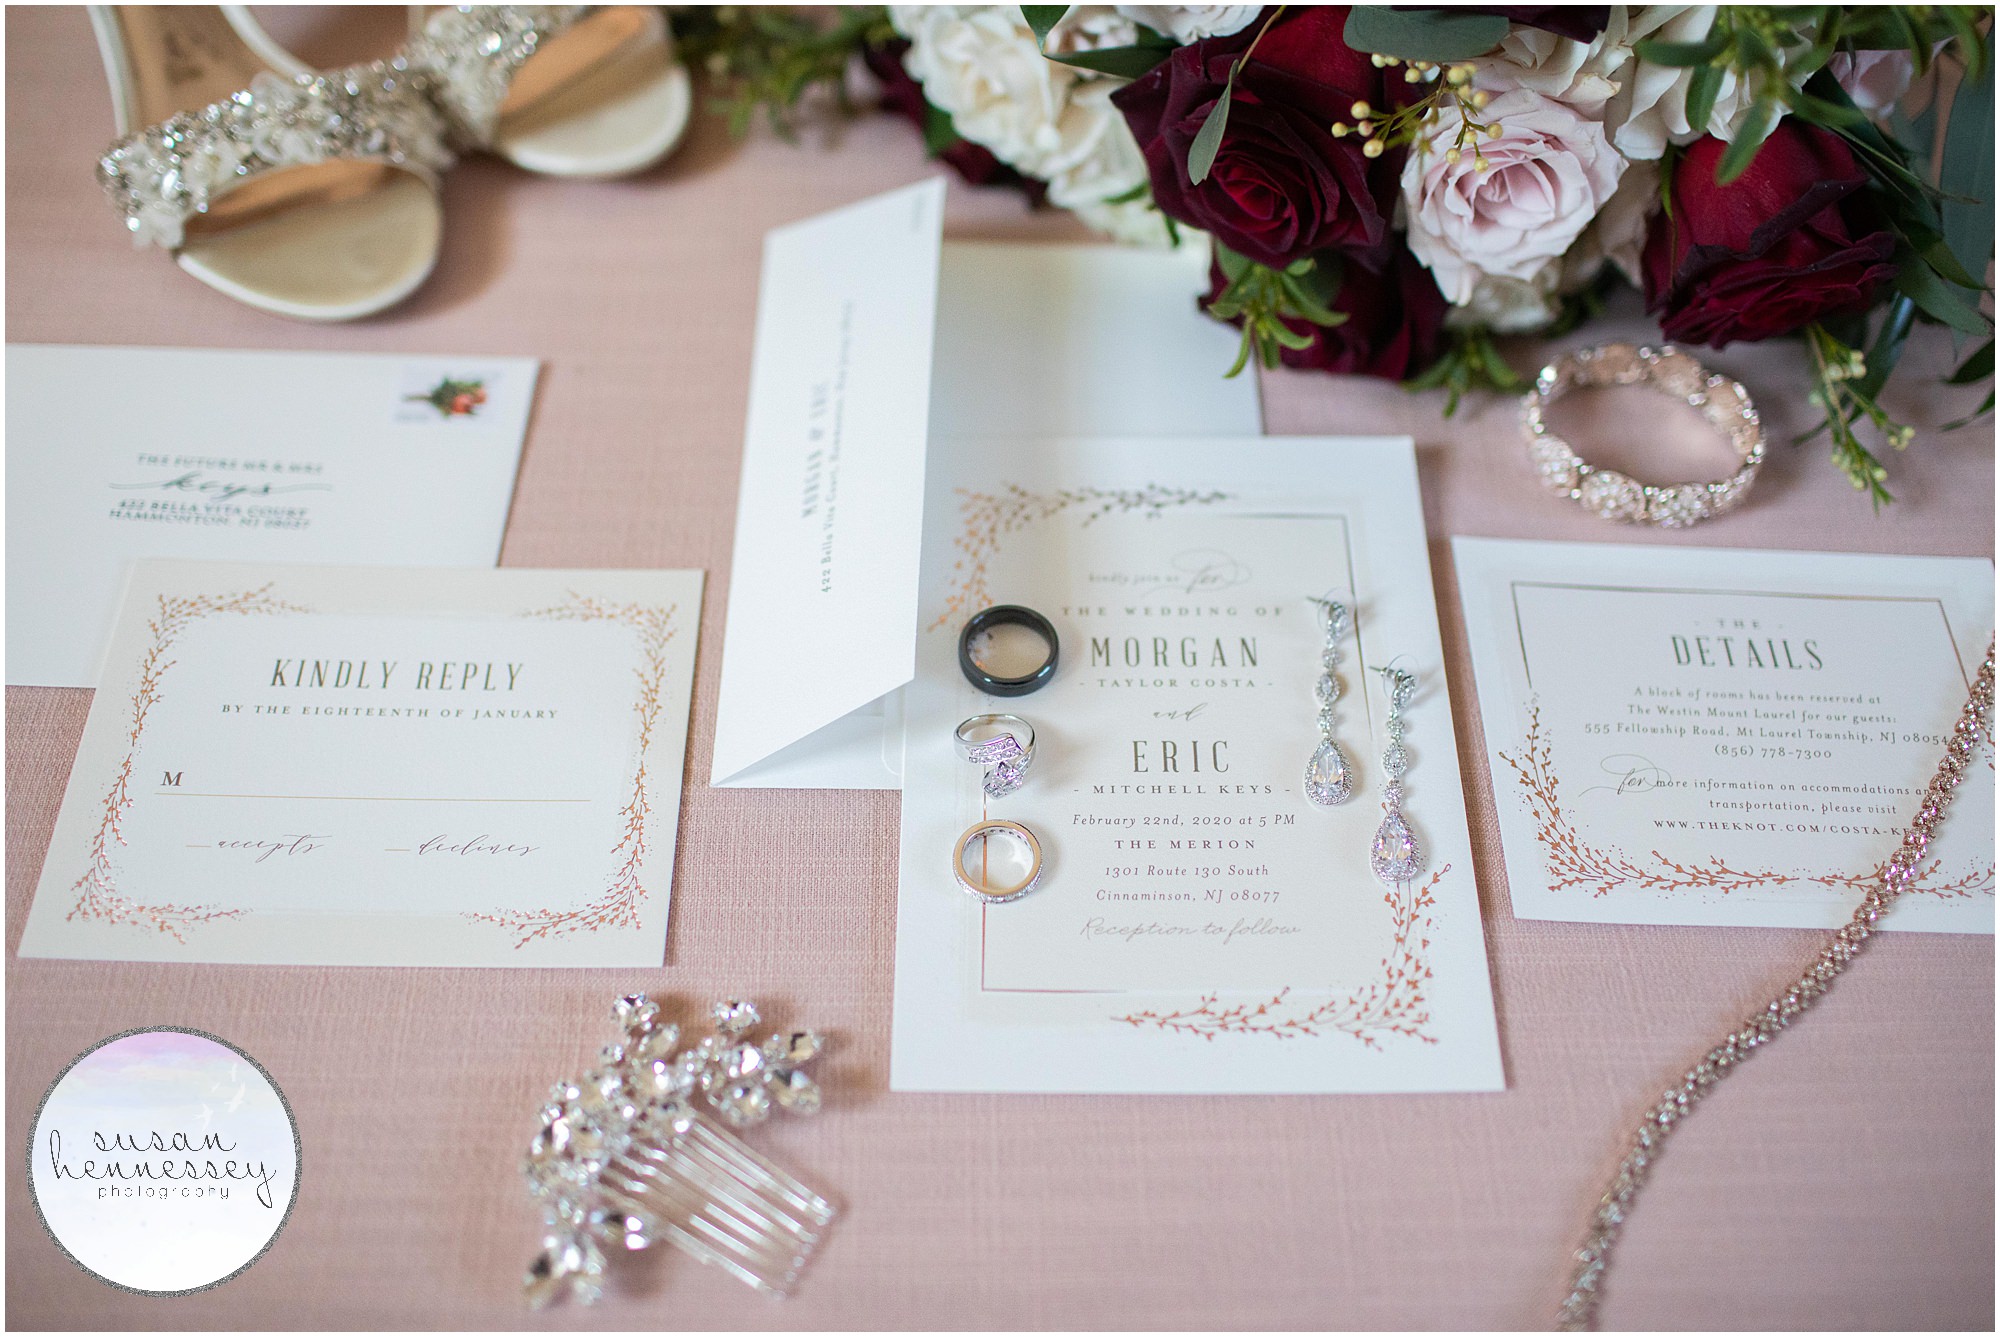 Invitation suite from Minted for Winter wedding